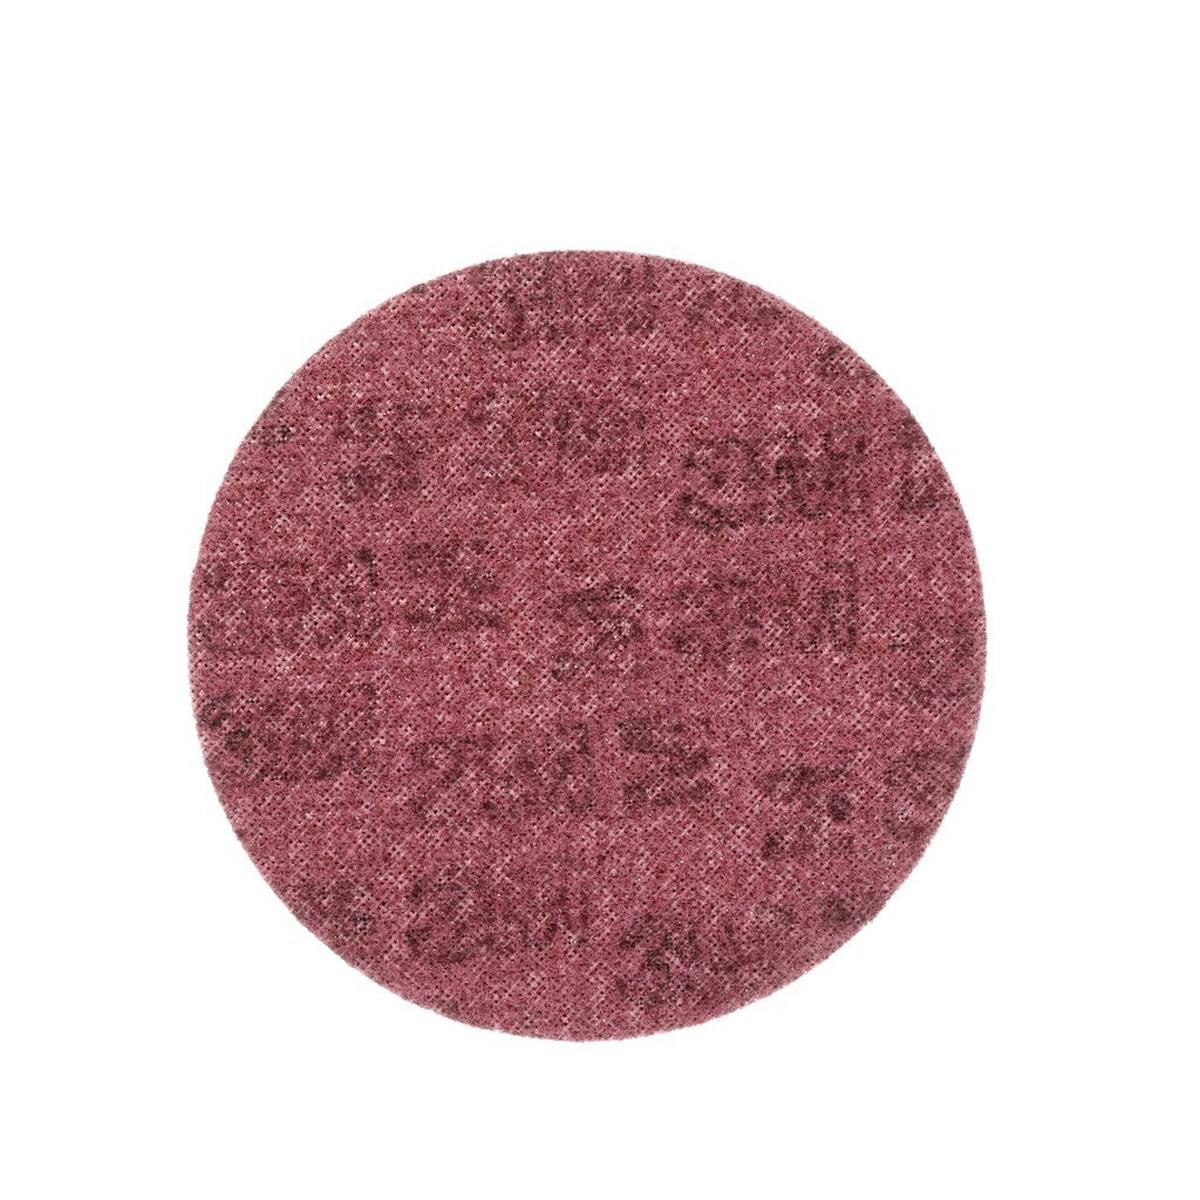 3M Scotch-Brite non-woven disc SC-DH without centering, red, 125 mm, A, medium #65336